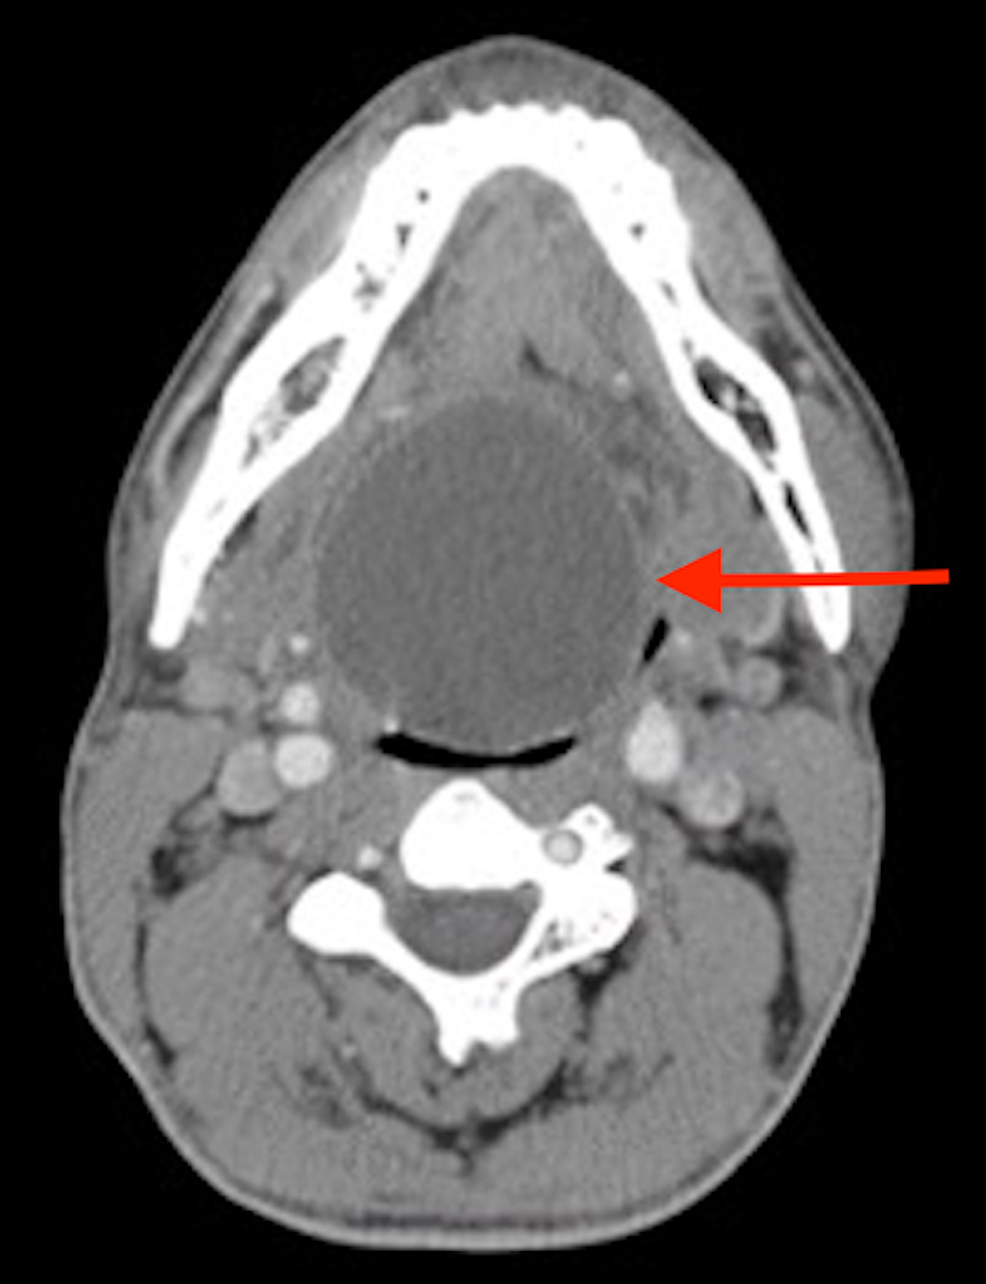 CT-image-of-the-mass-lodged-in-the-oropharynx,-as-indicated-by-the-red-arrow.-